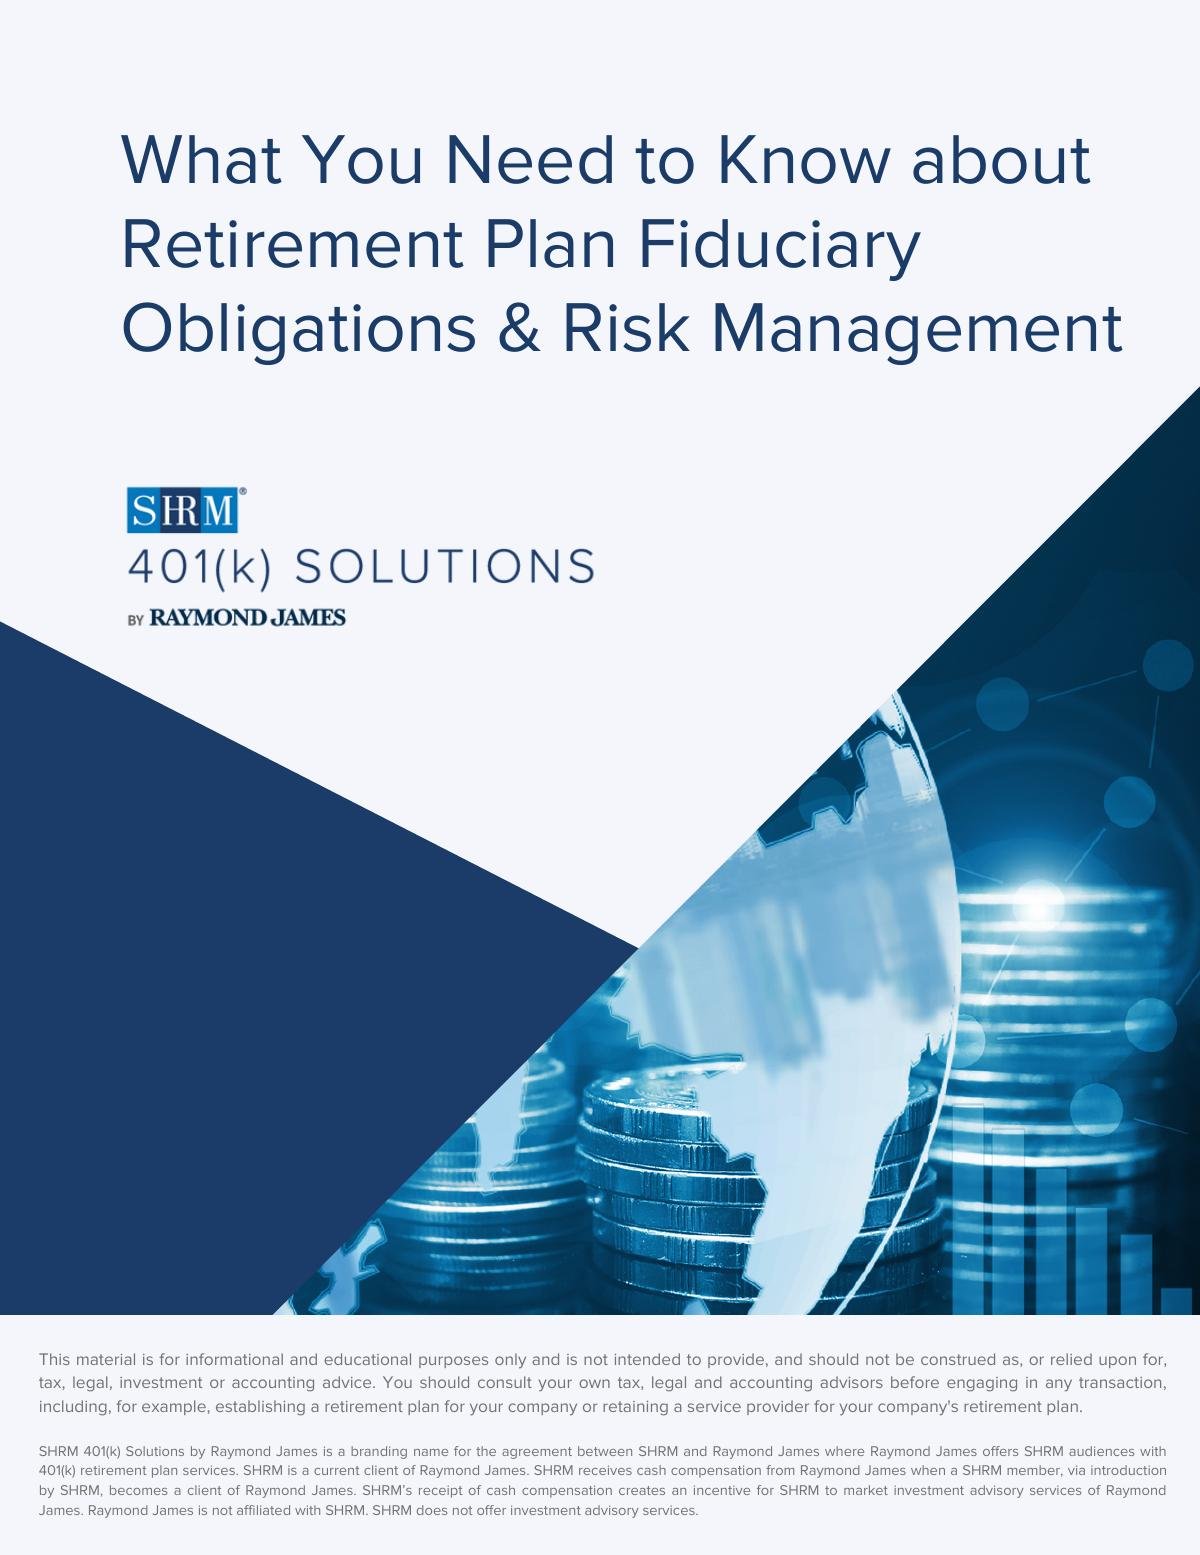 What You Need to Know about Retirement Plan Fiduciary Obligations & Risk Management